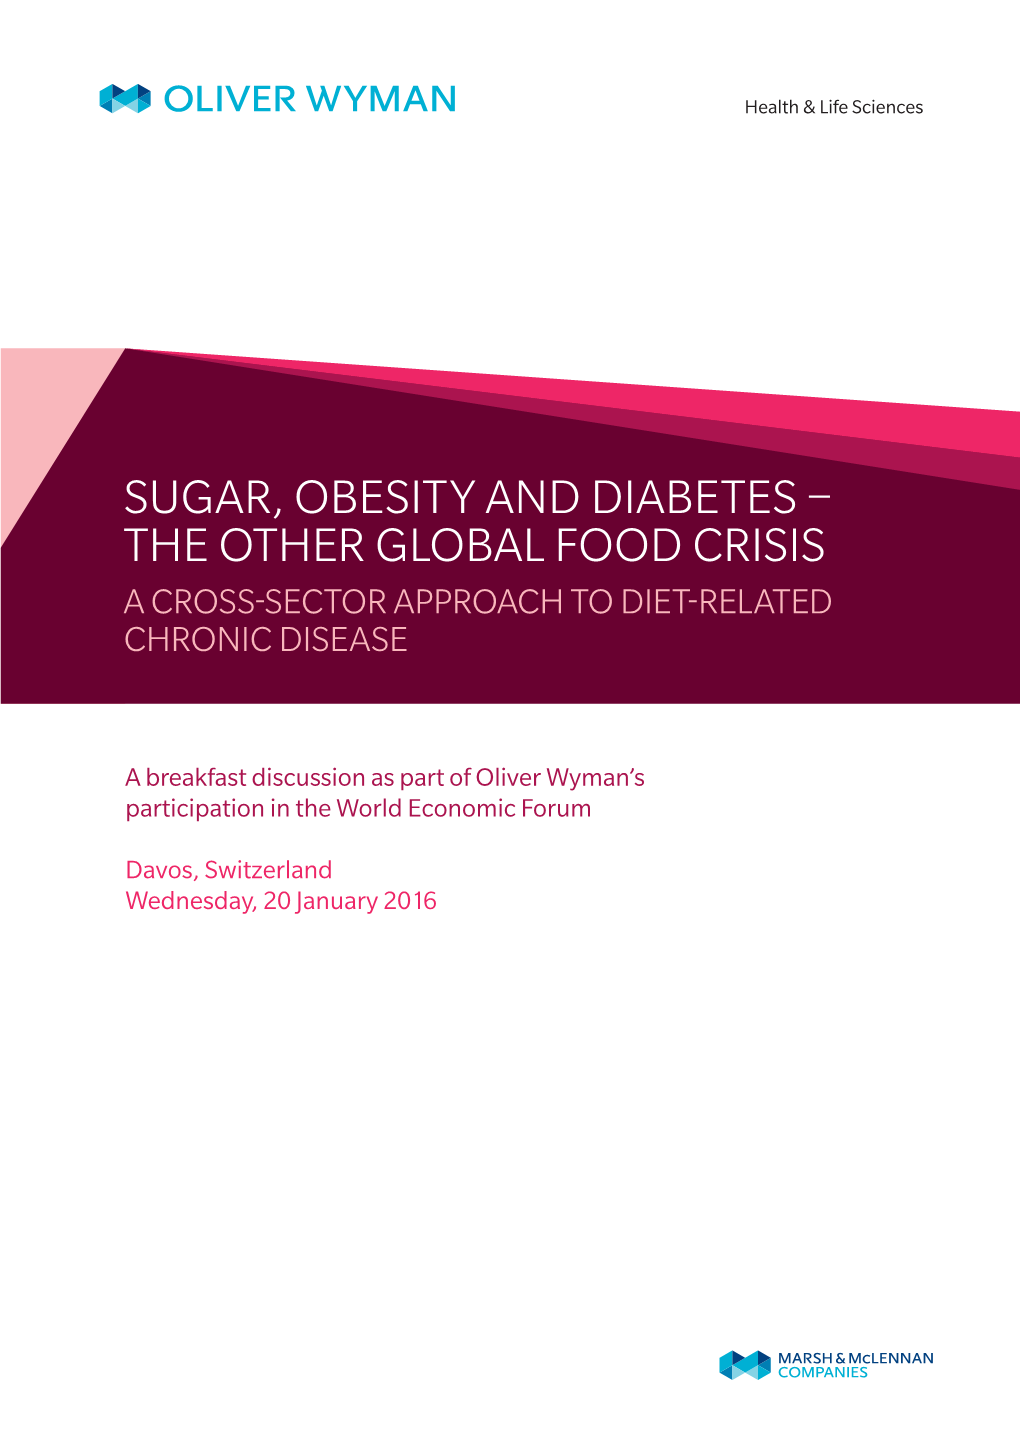 Sugar, Obesity and Diabetes – the Other Global Food Crisis a Cross-Sector Approach to Diet-Related Chronic Disease